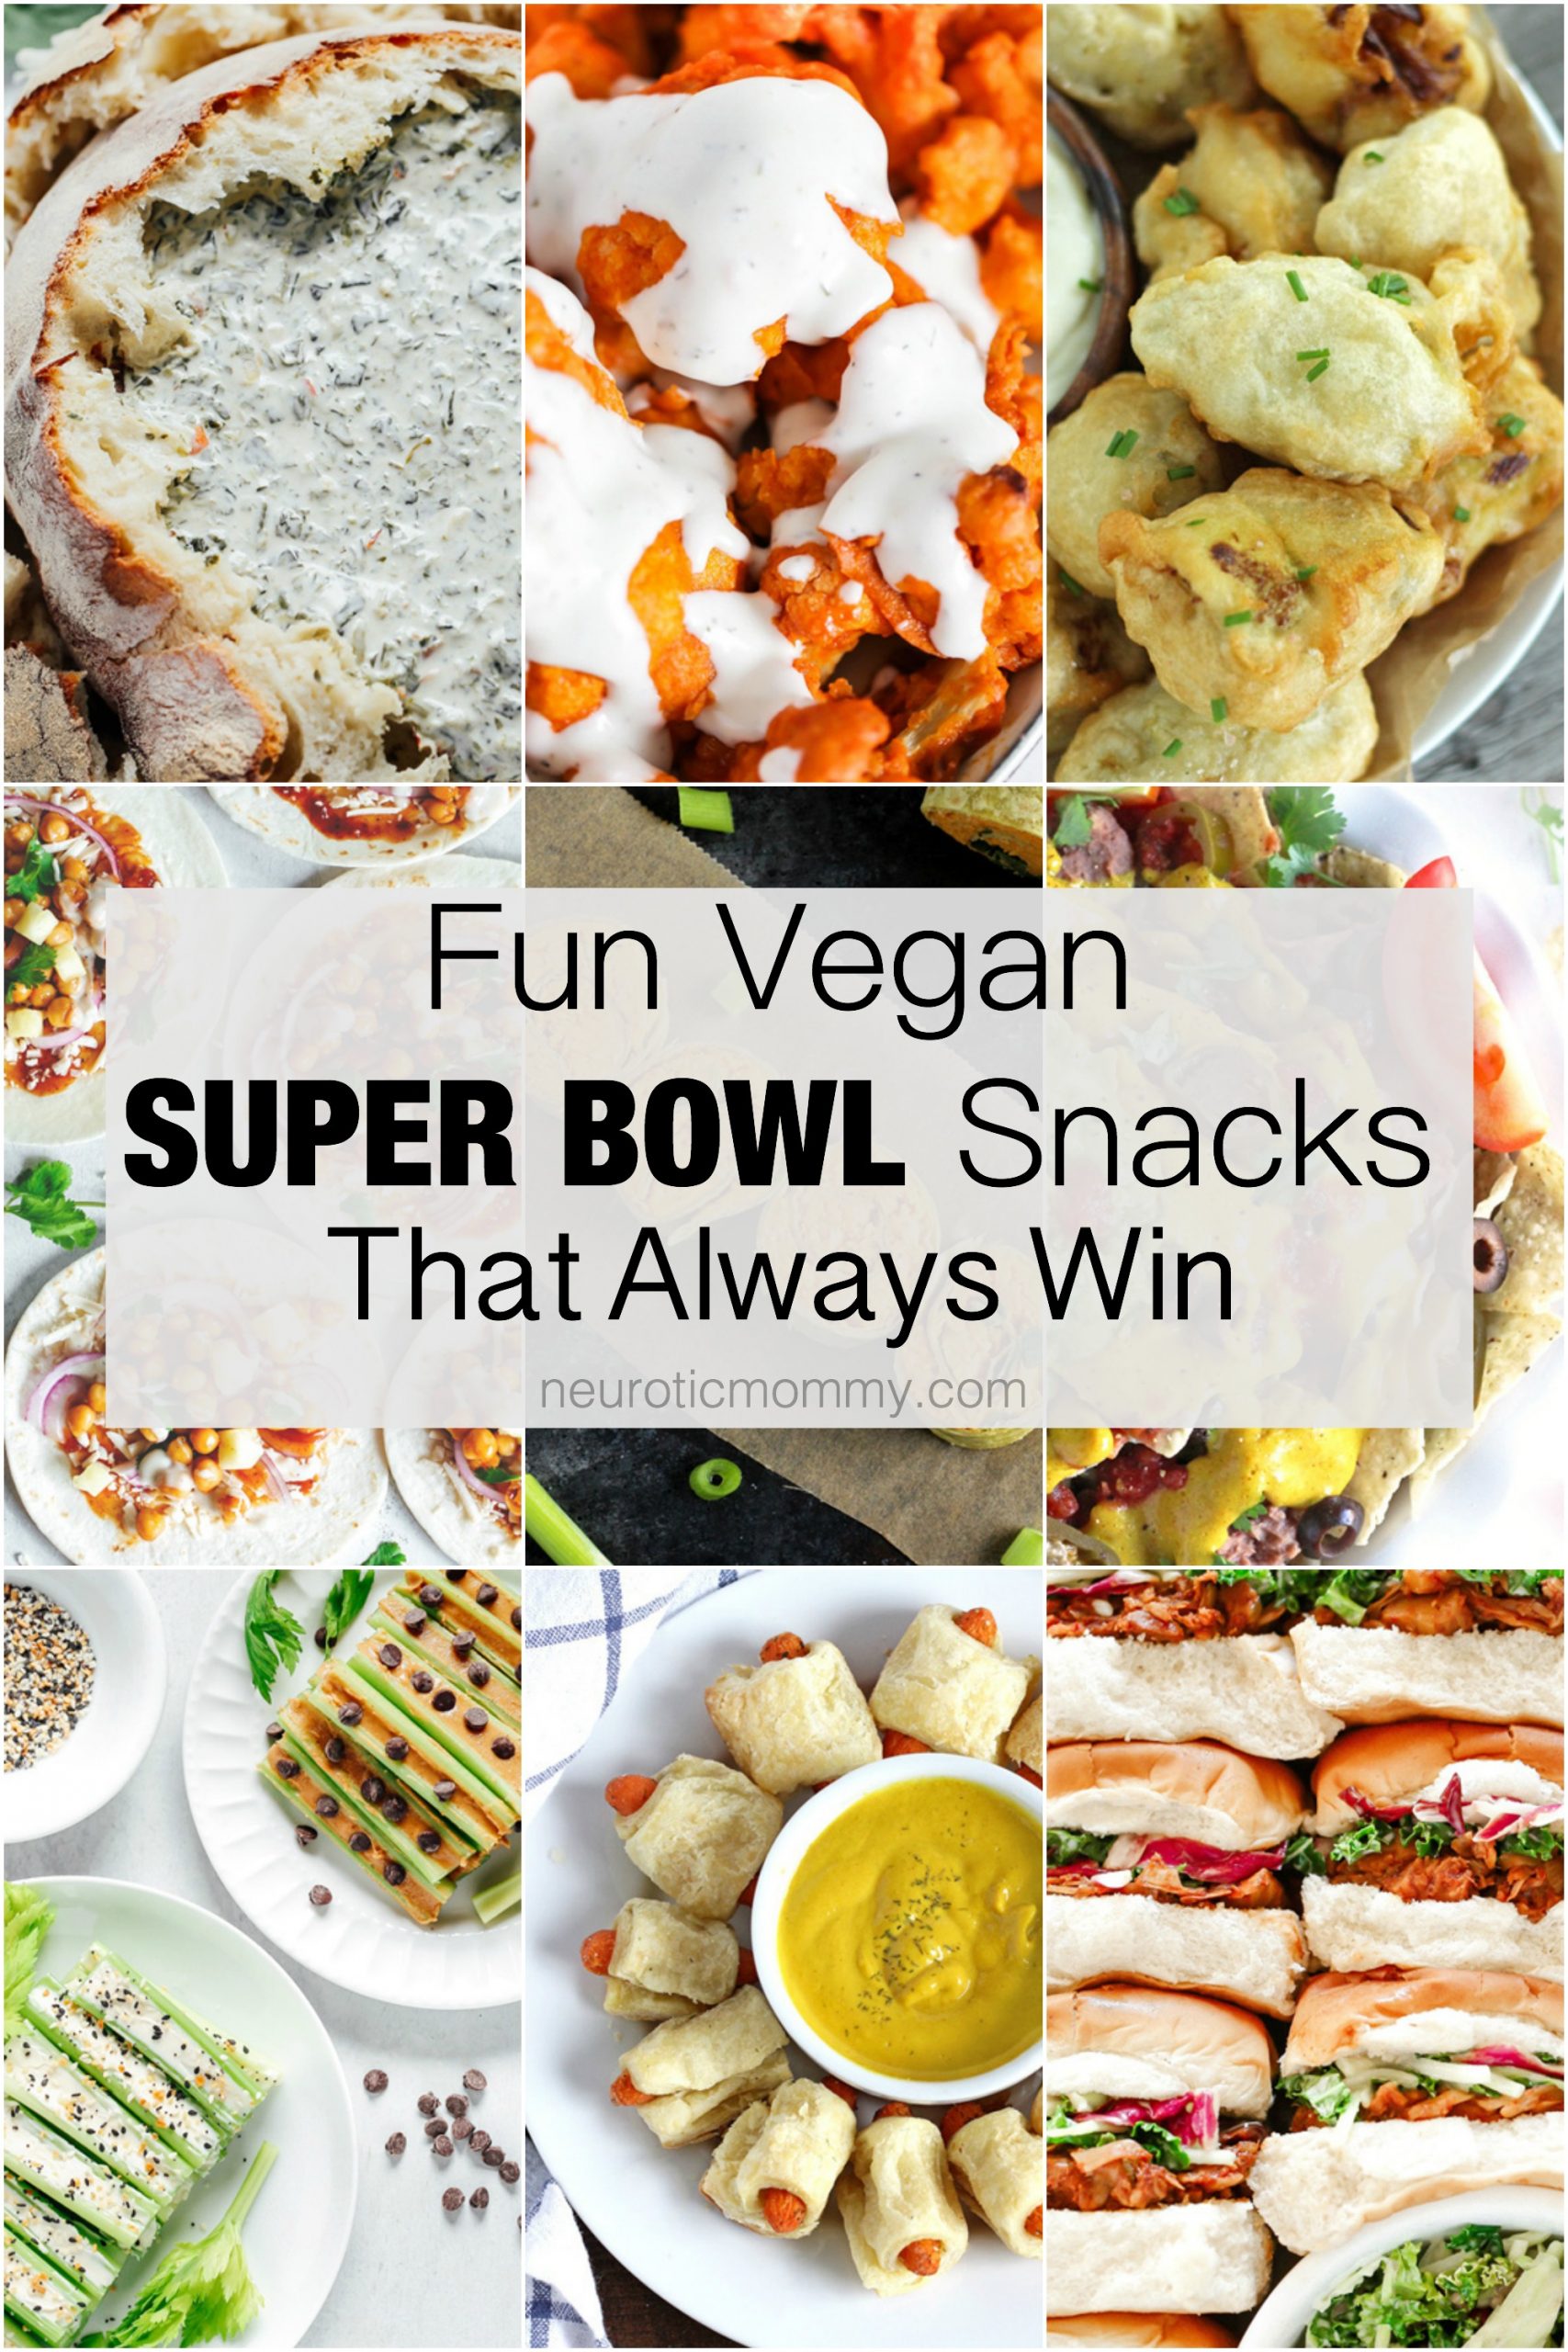 Fun Vegan Super Bowl Snack Recipes For Game Day - There’s a little bit of something for everyone without the overwhelm of what to make. Stick to what everyone wants to really snack on and you’re all set. NeuroticMommy.com #superbowl2020 #snackroundup #vegansnacks